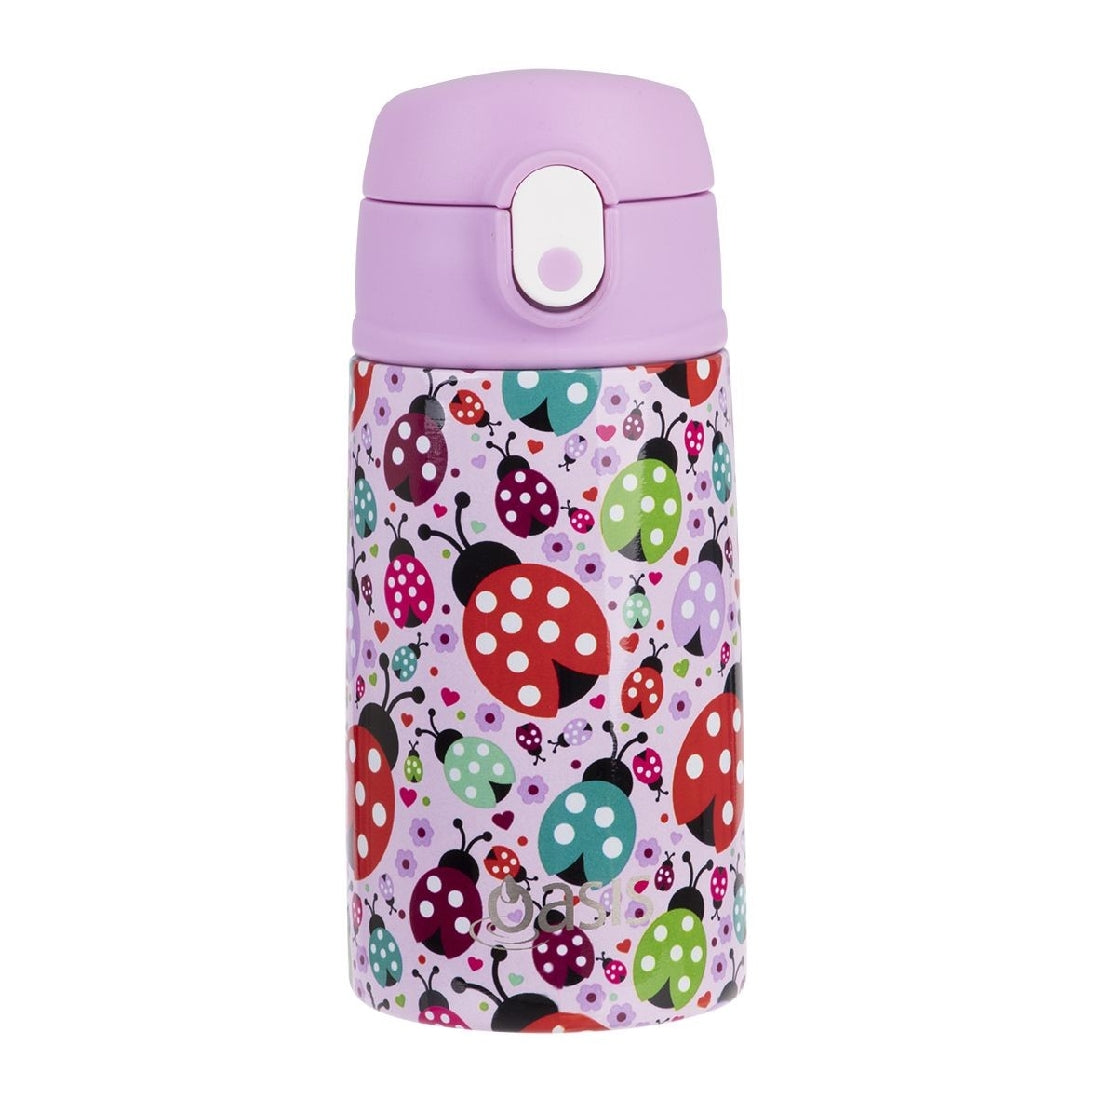 Oasis Stainless Steel Double Wall Insulated Kid's Drink Bottle W/ Sipper 400ml - Lovely Ladybugs